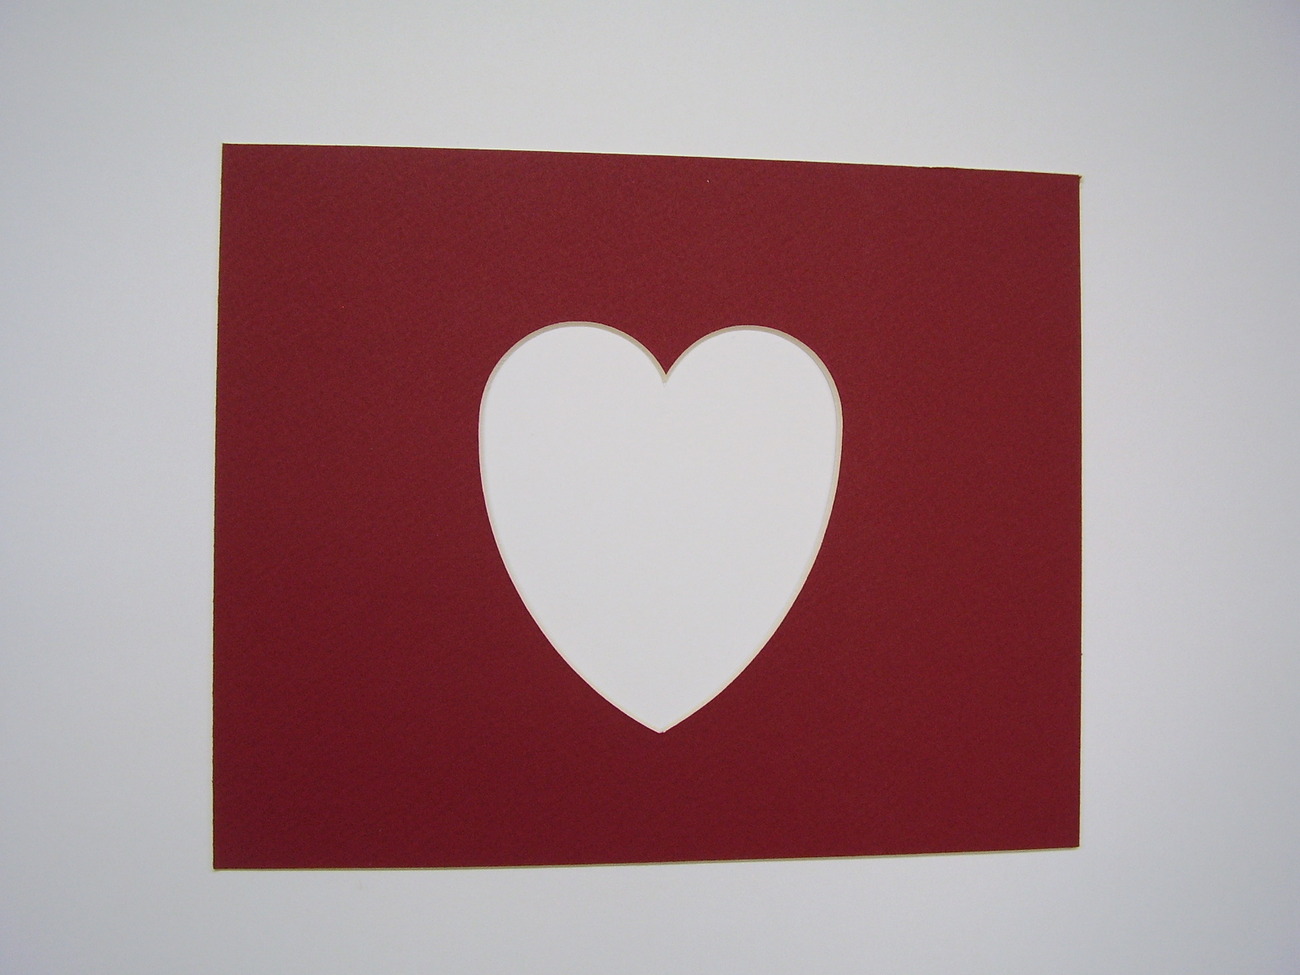 Picture Frame Mat Brick Red Heart Shape Design Cutout 8x10 with custom size hear - $1.99